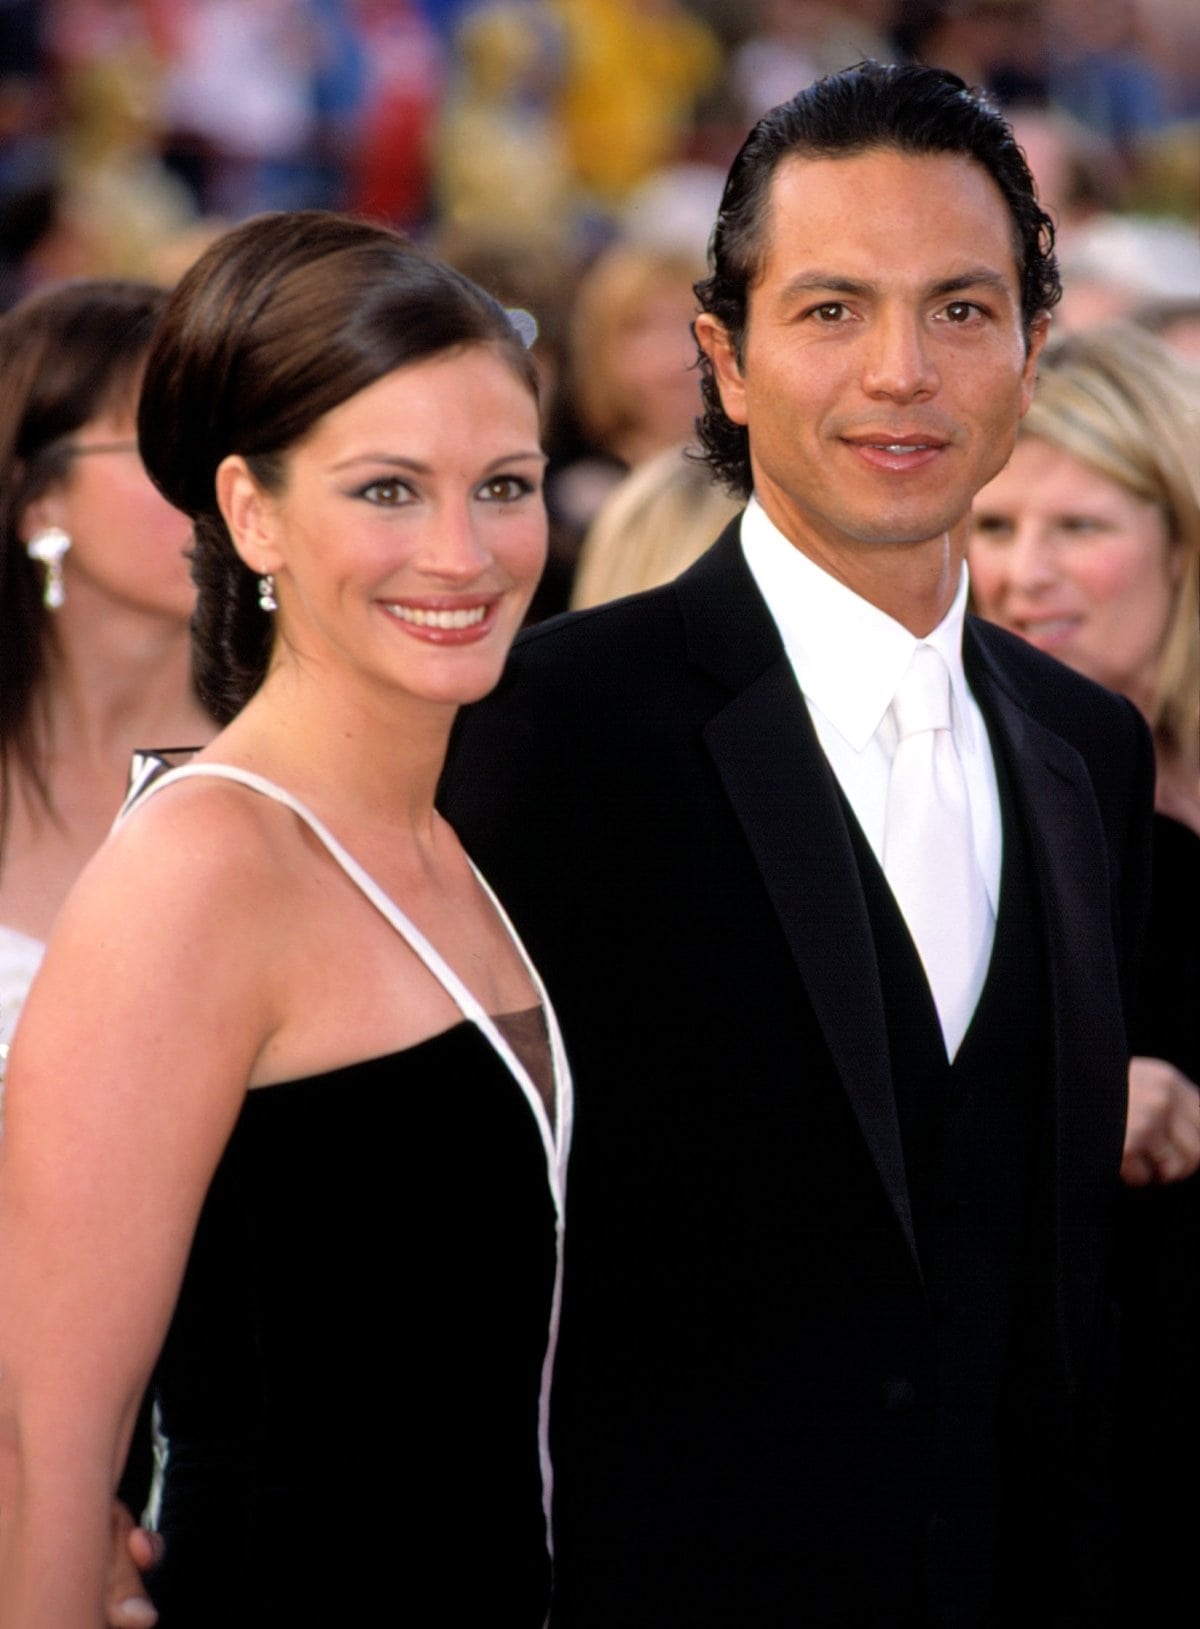 Julia Roberts met Benjamin Bratt in a Manhattan restaurant in 1997 and they dated for nearly 4 years before splitting in June 2001